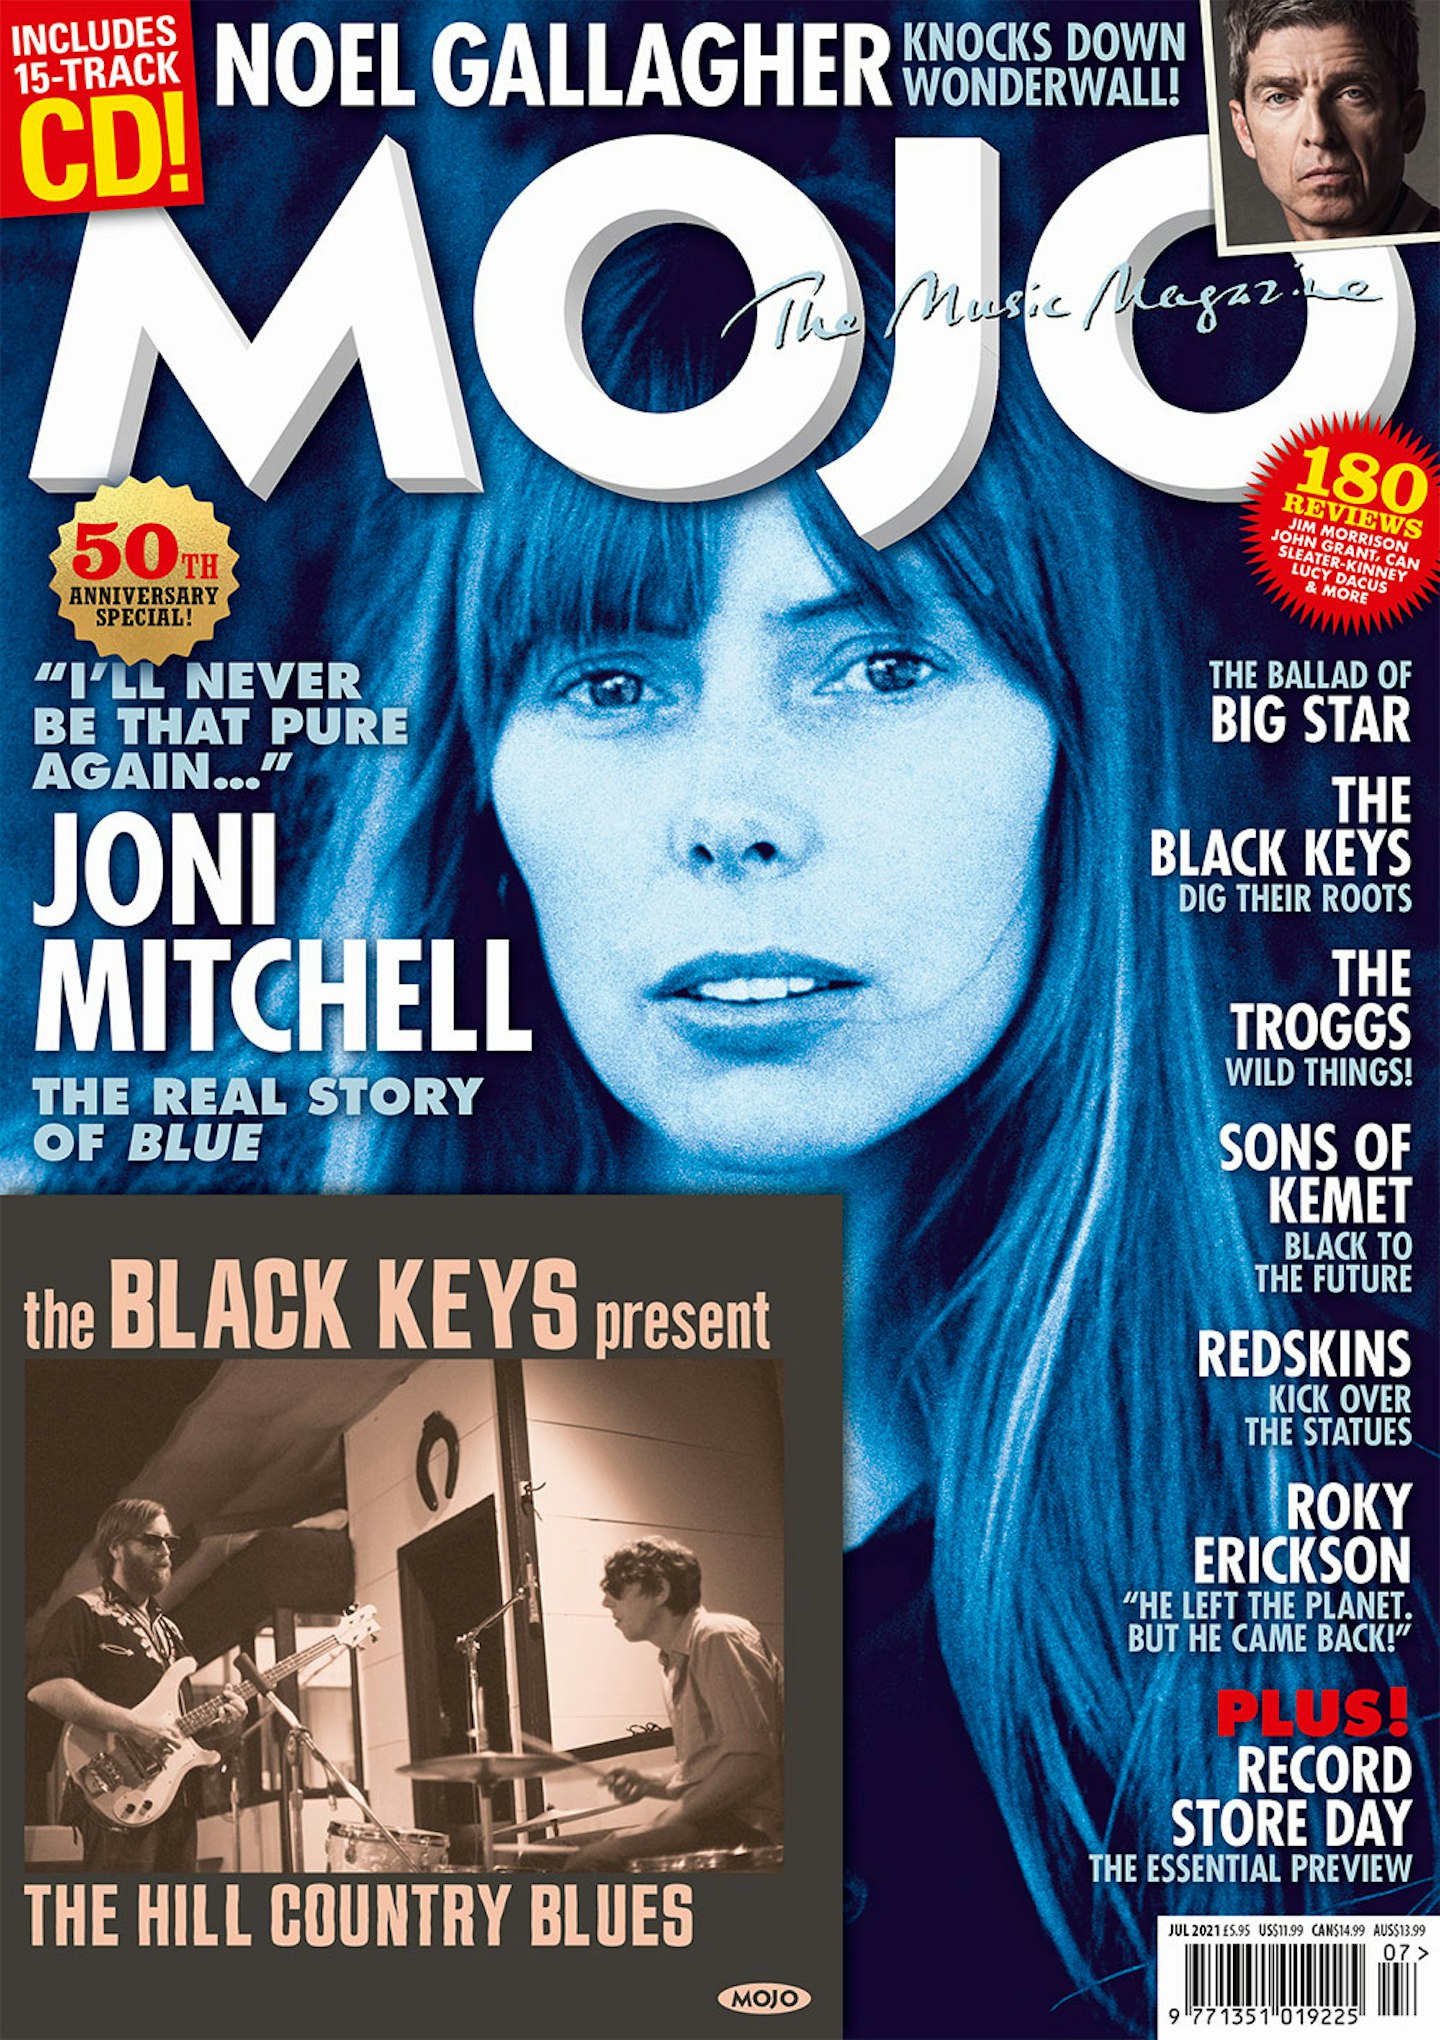 MOJO 332 cover, featuring Joni Mitchell